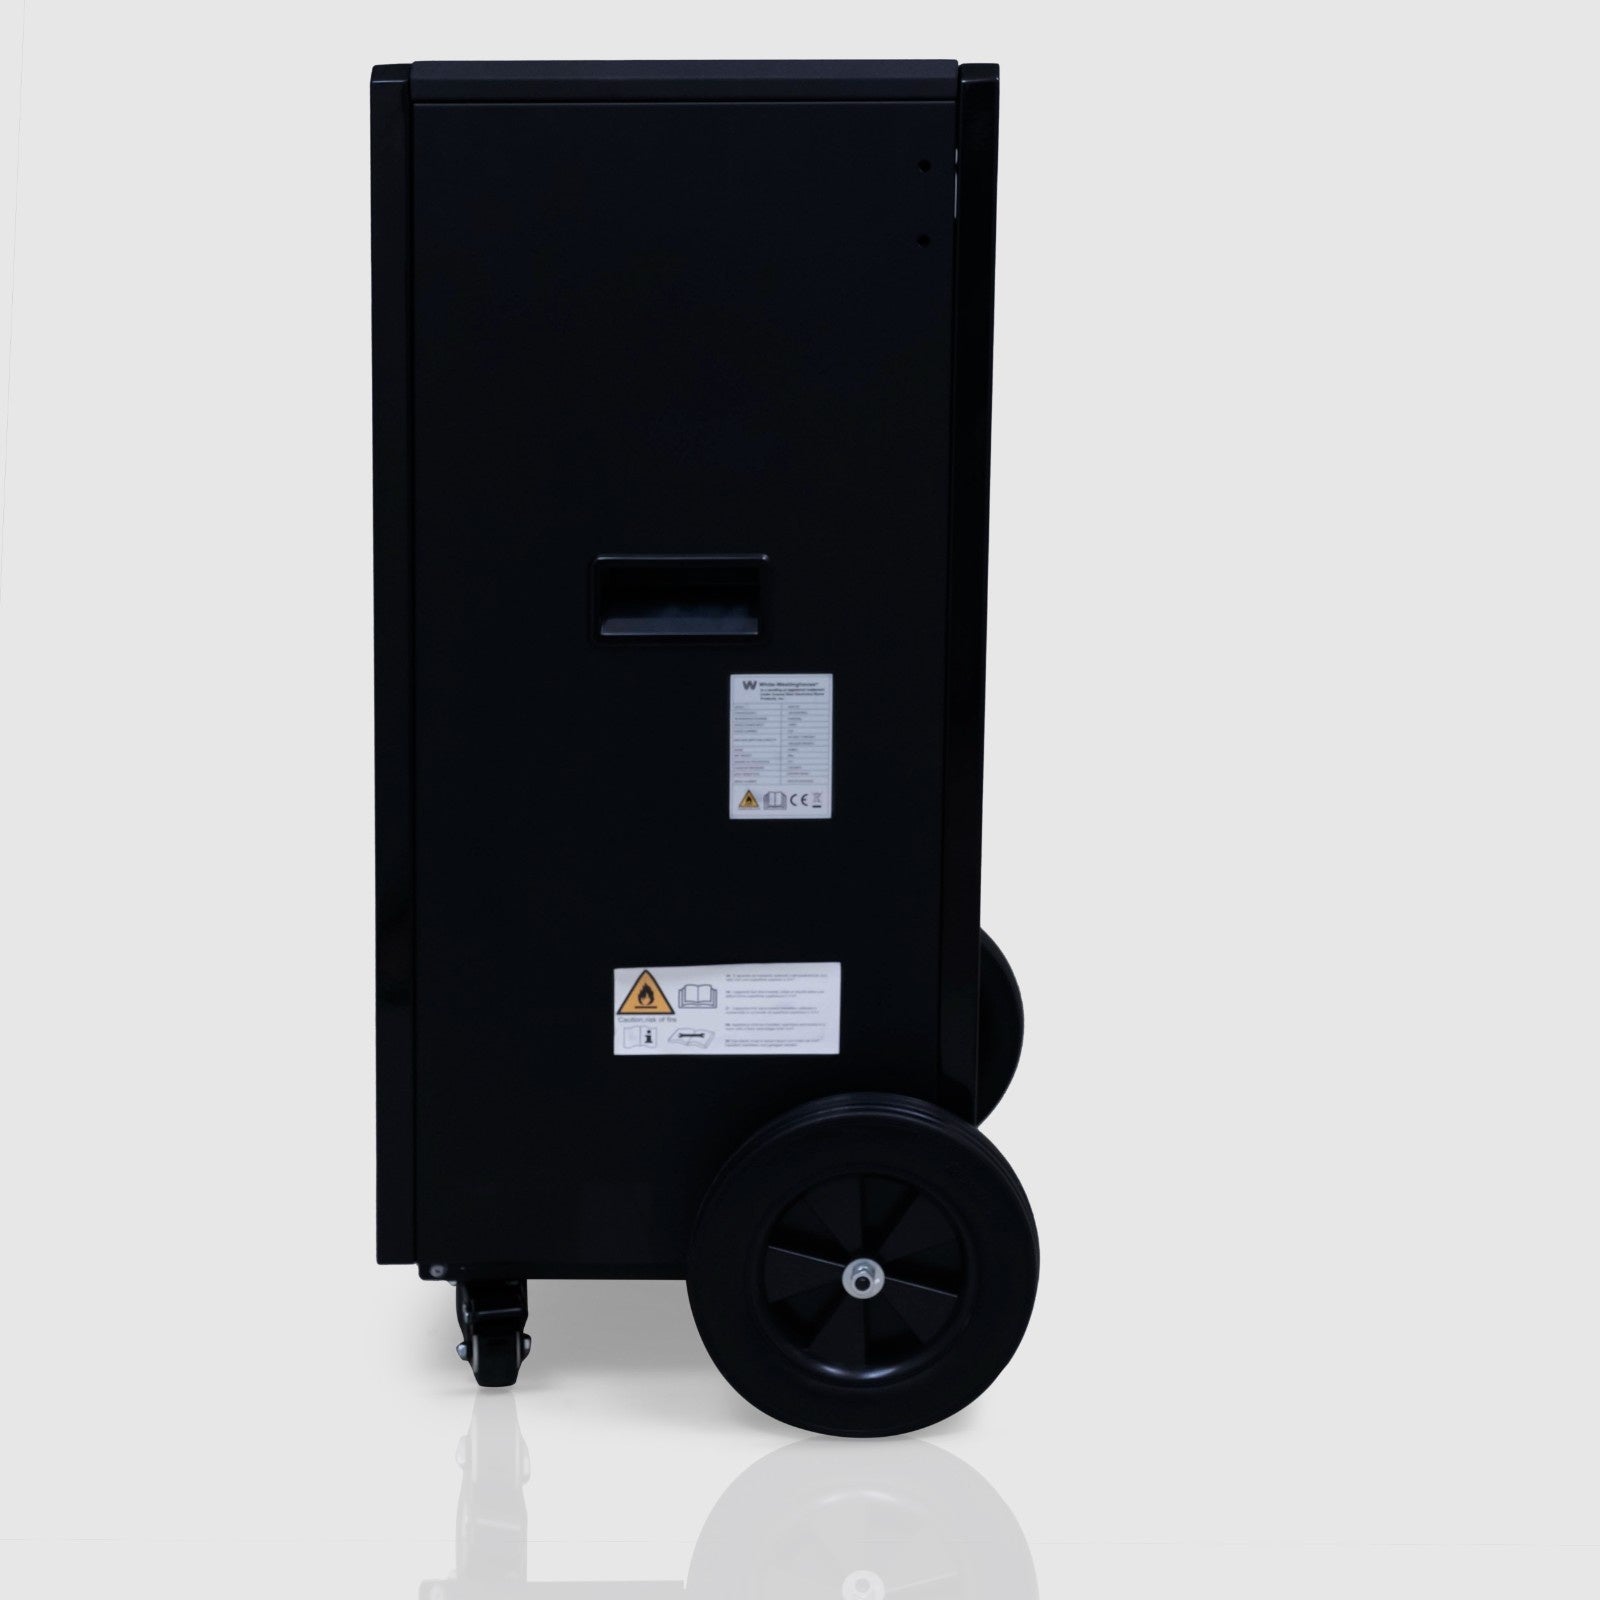 Side view of the White Westinghouse Industrial Dehumidifier WDE100, showcasing the large rear wheels and smaller front caster for enhanced mobility. The design includes a handle and labels for safety and operational information, making it suitable for large commercial and industrial spaces.